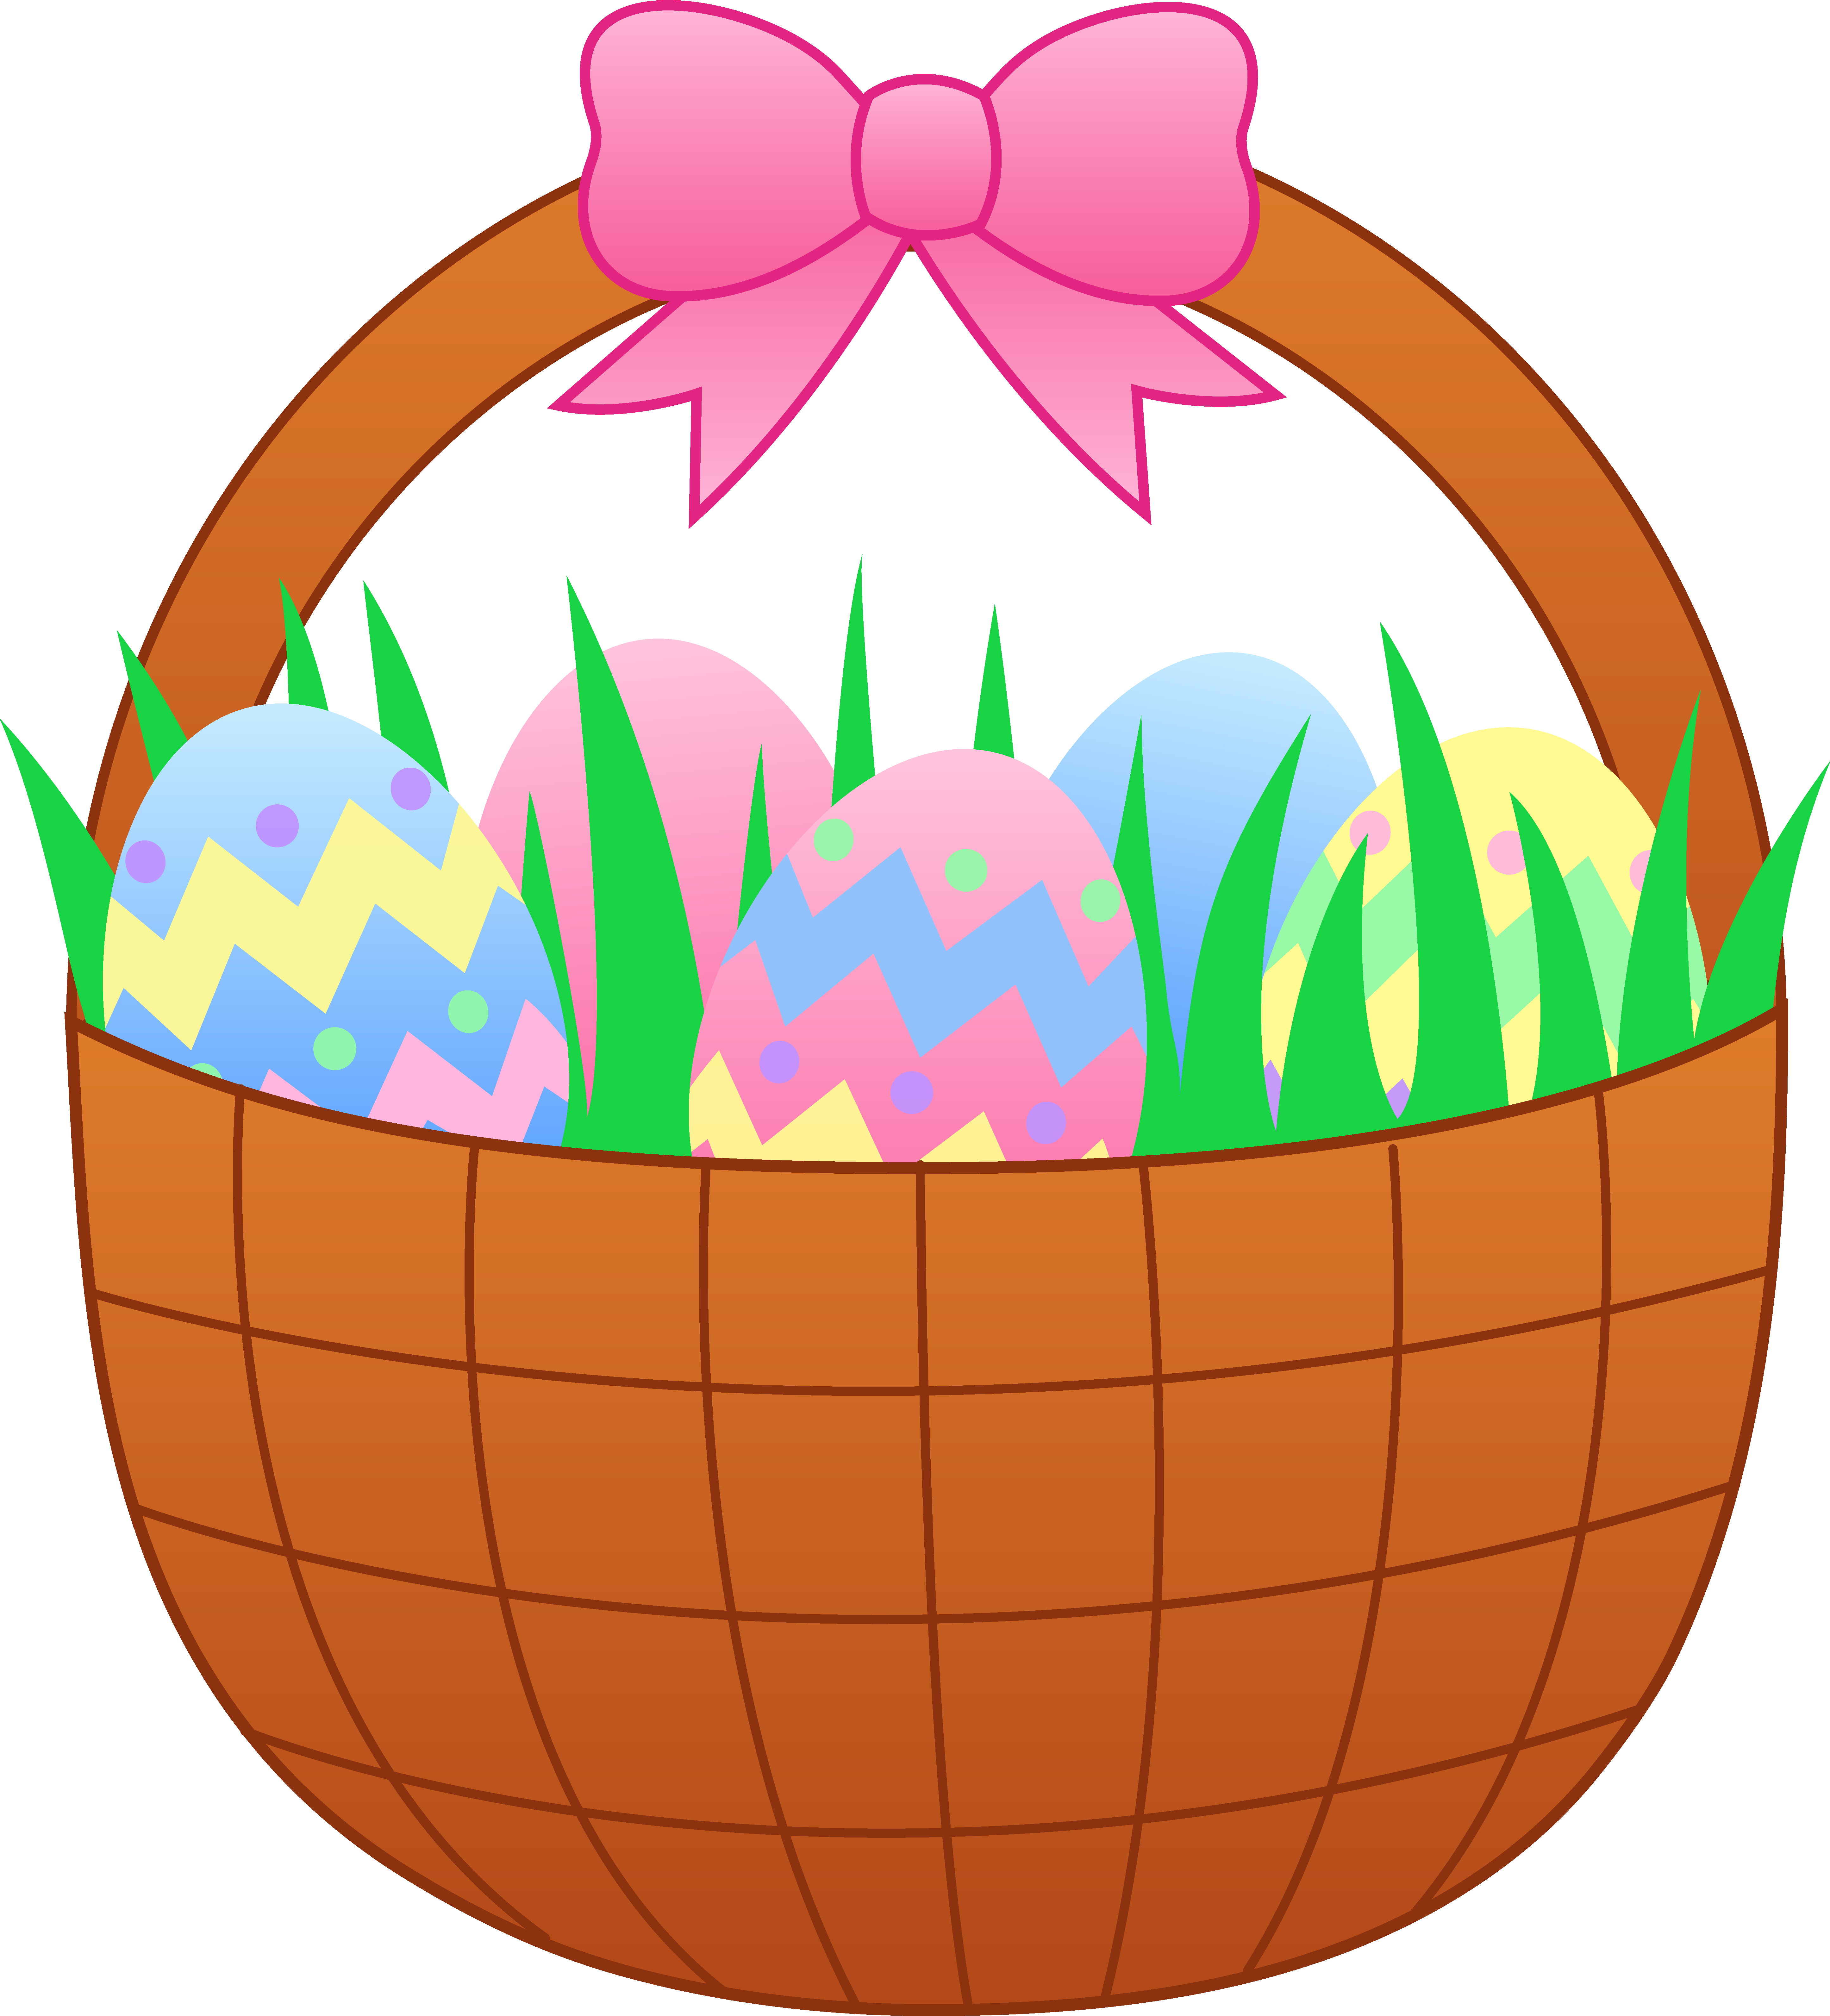 Easter Egg Picts Cartoon - ClipArt Best